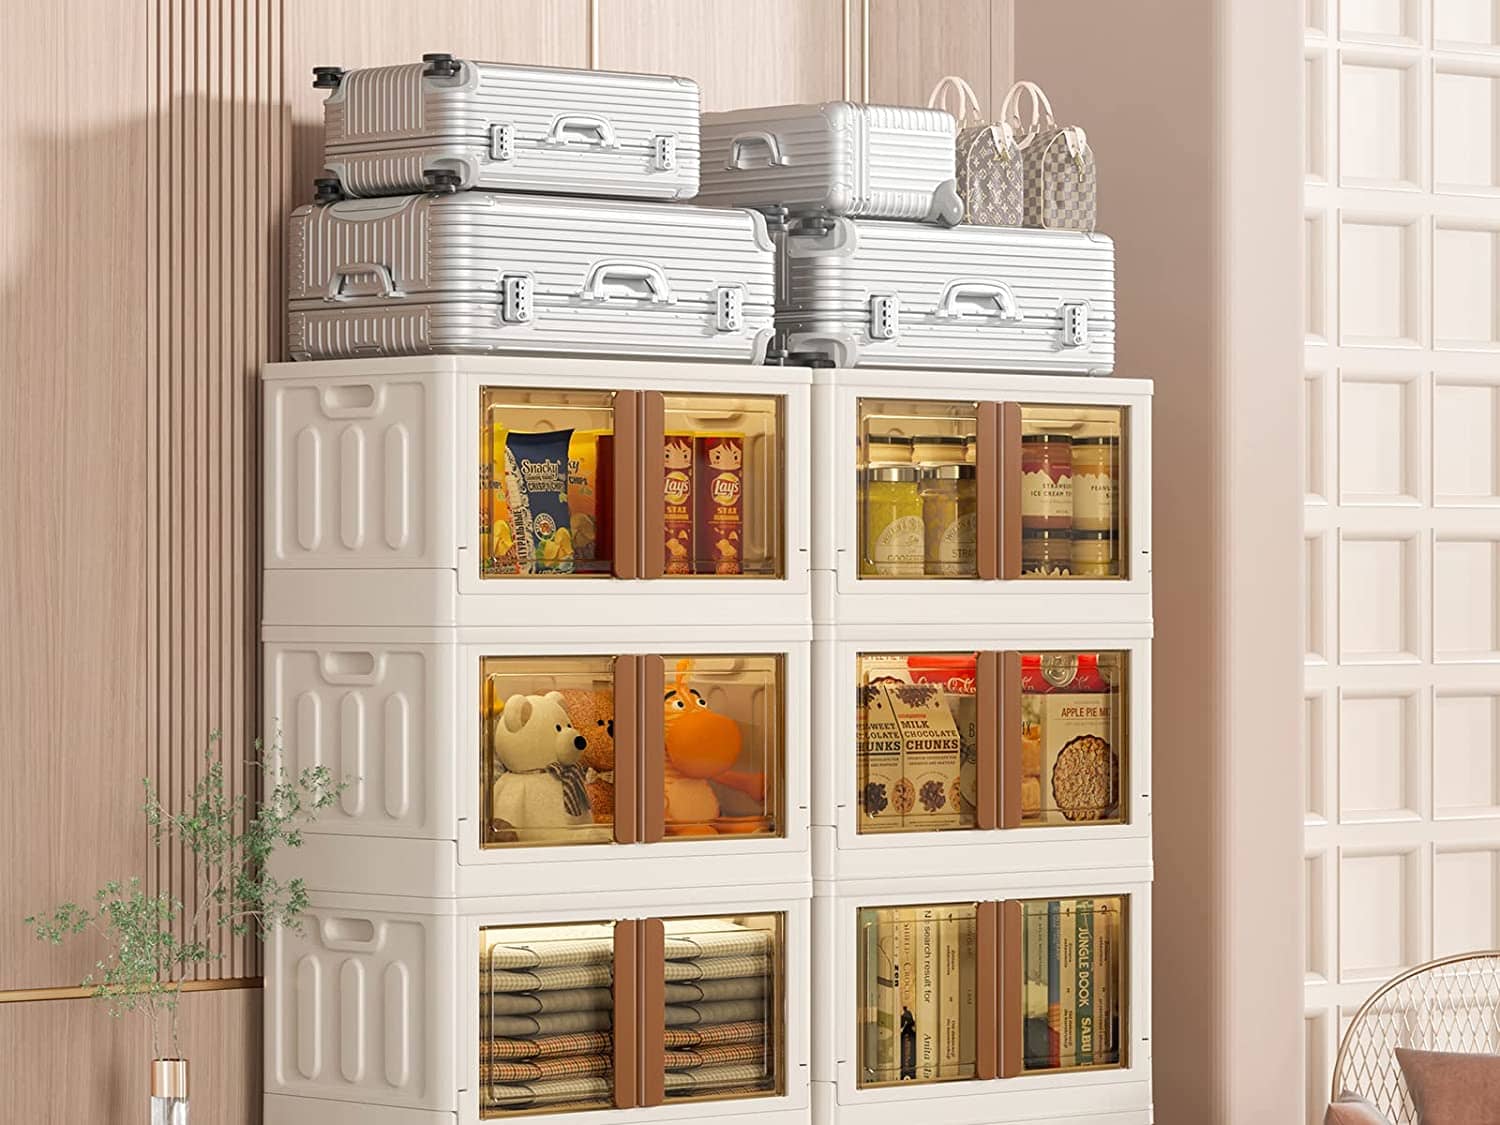 Best Collapsible Storage Bins for Small Spaces